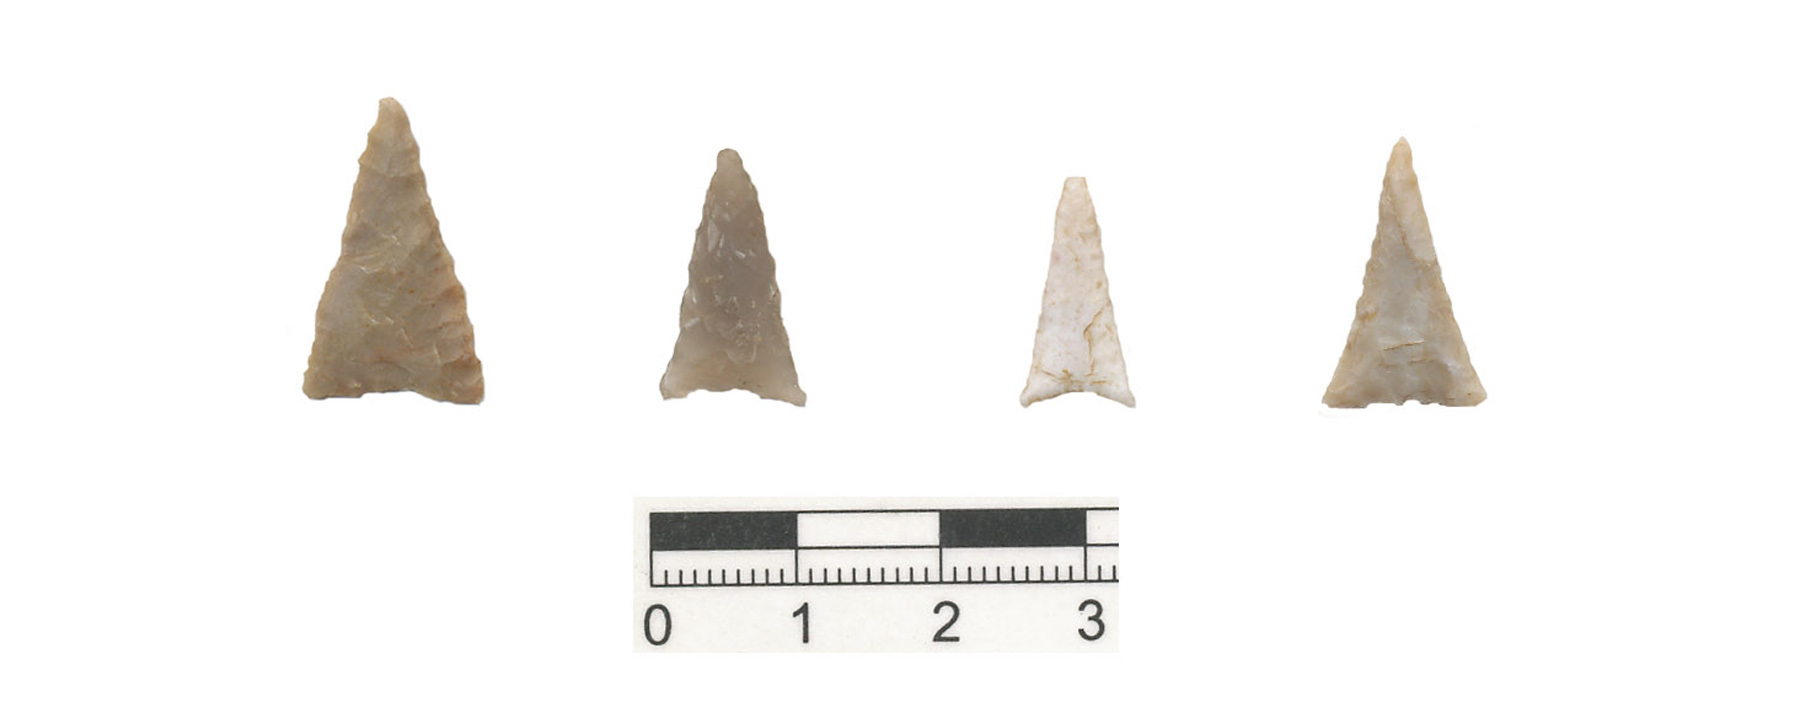 Southwest Triangular points from the Yuma Wash site, an unnotched type common throughout the Classic period.